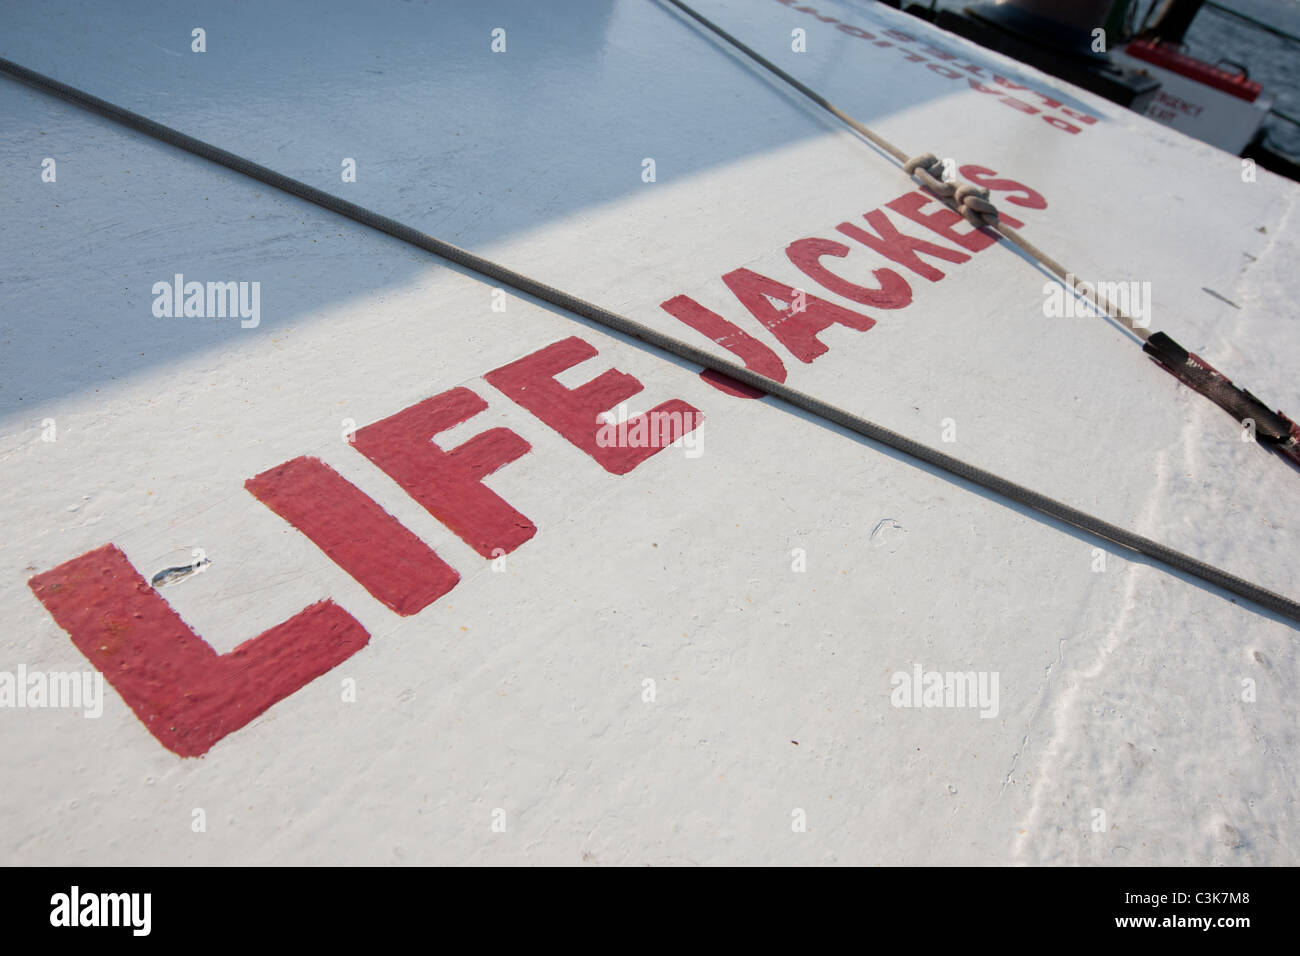 A box on a ship deck containing life jackets for use in emergency evacuation situations. Stock Photo